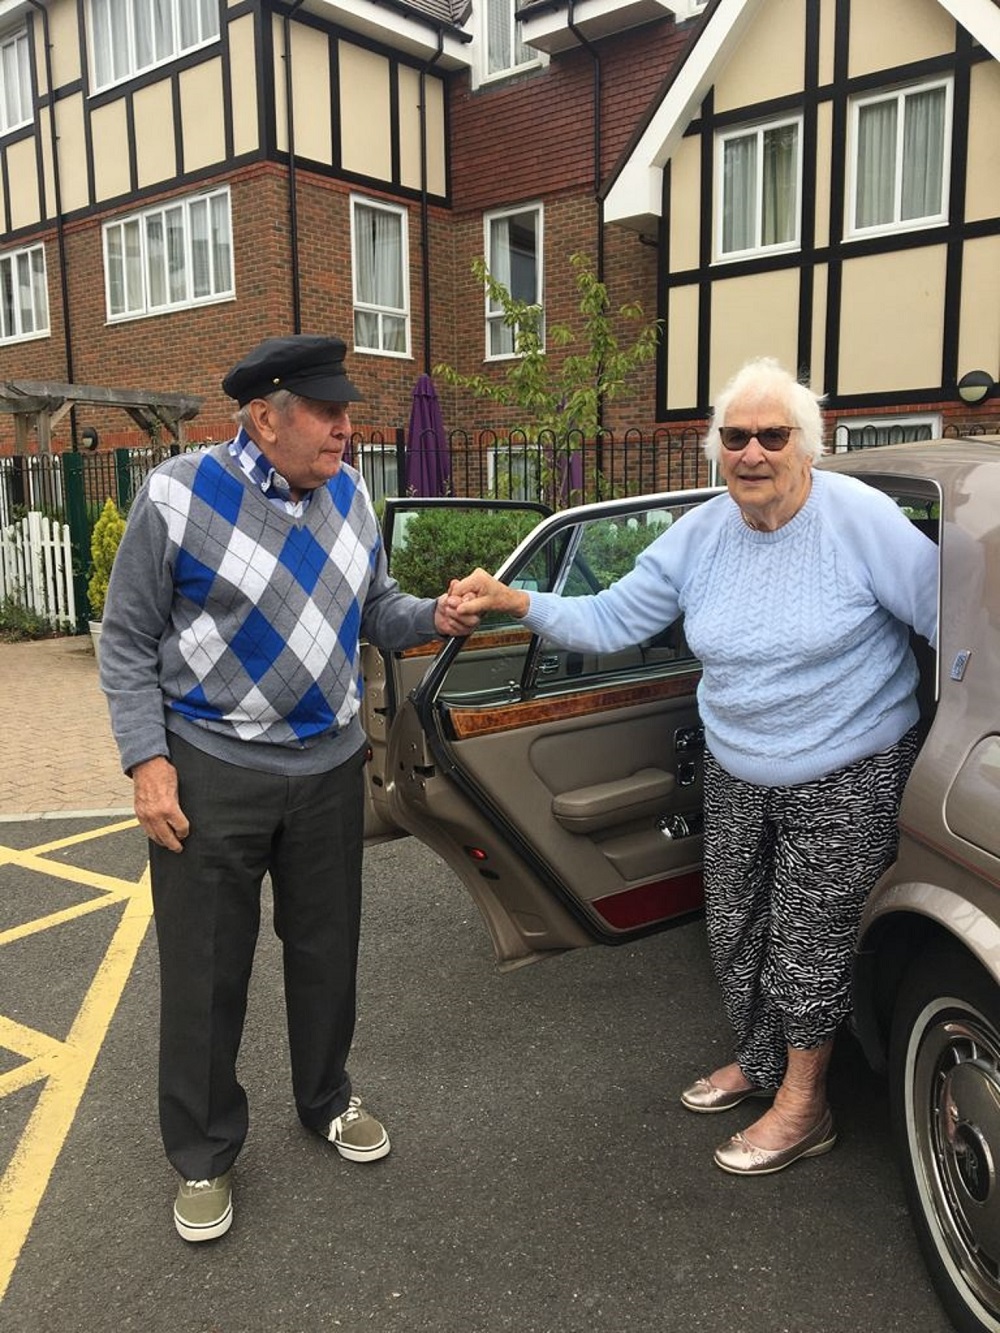 Alec Goy helping fellow resident Eve out of the Rolls Royce